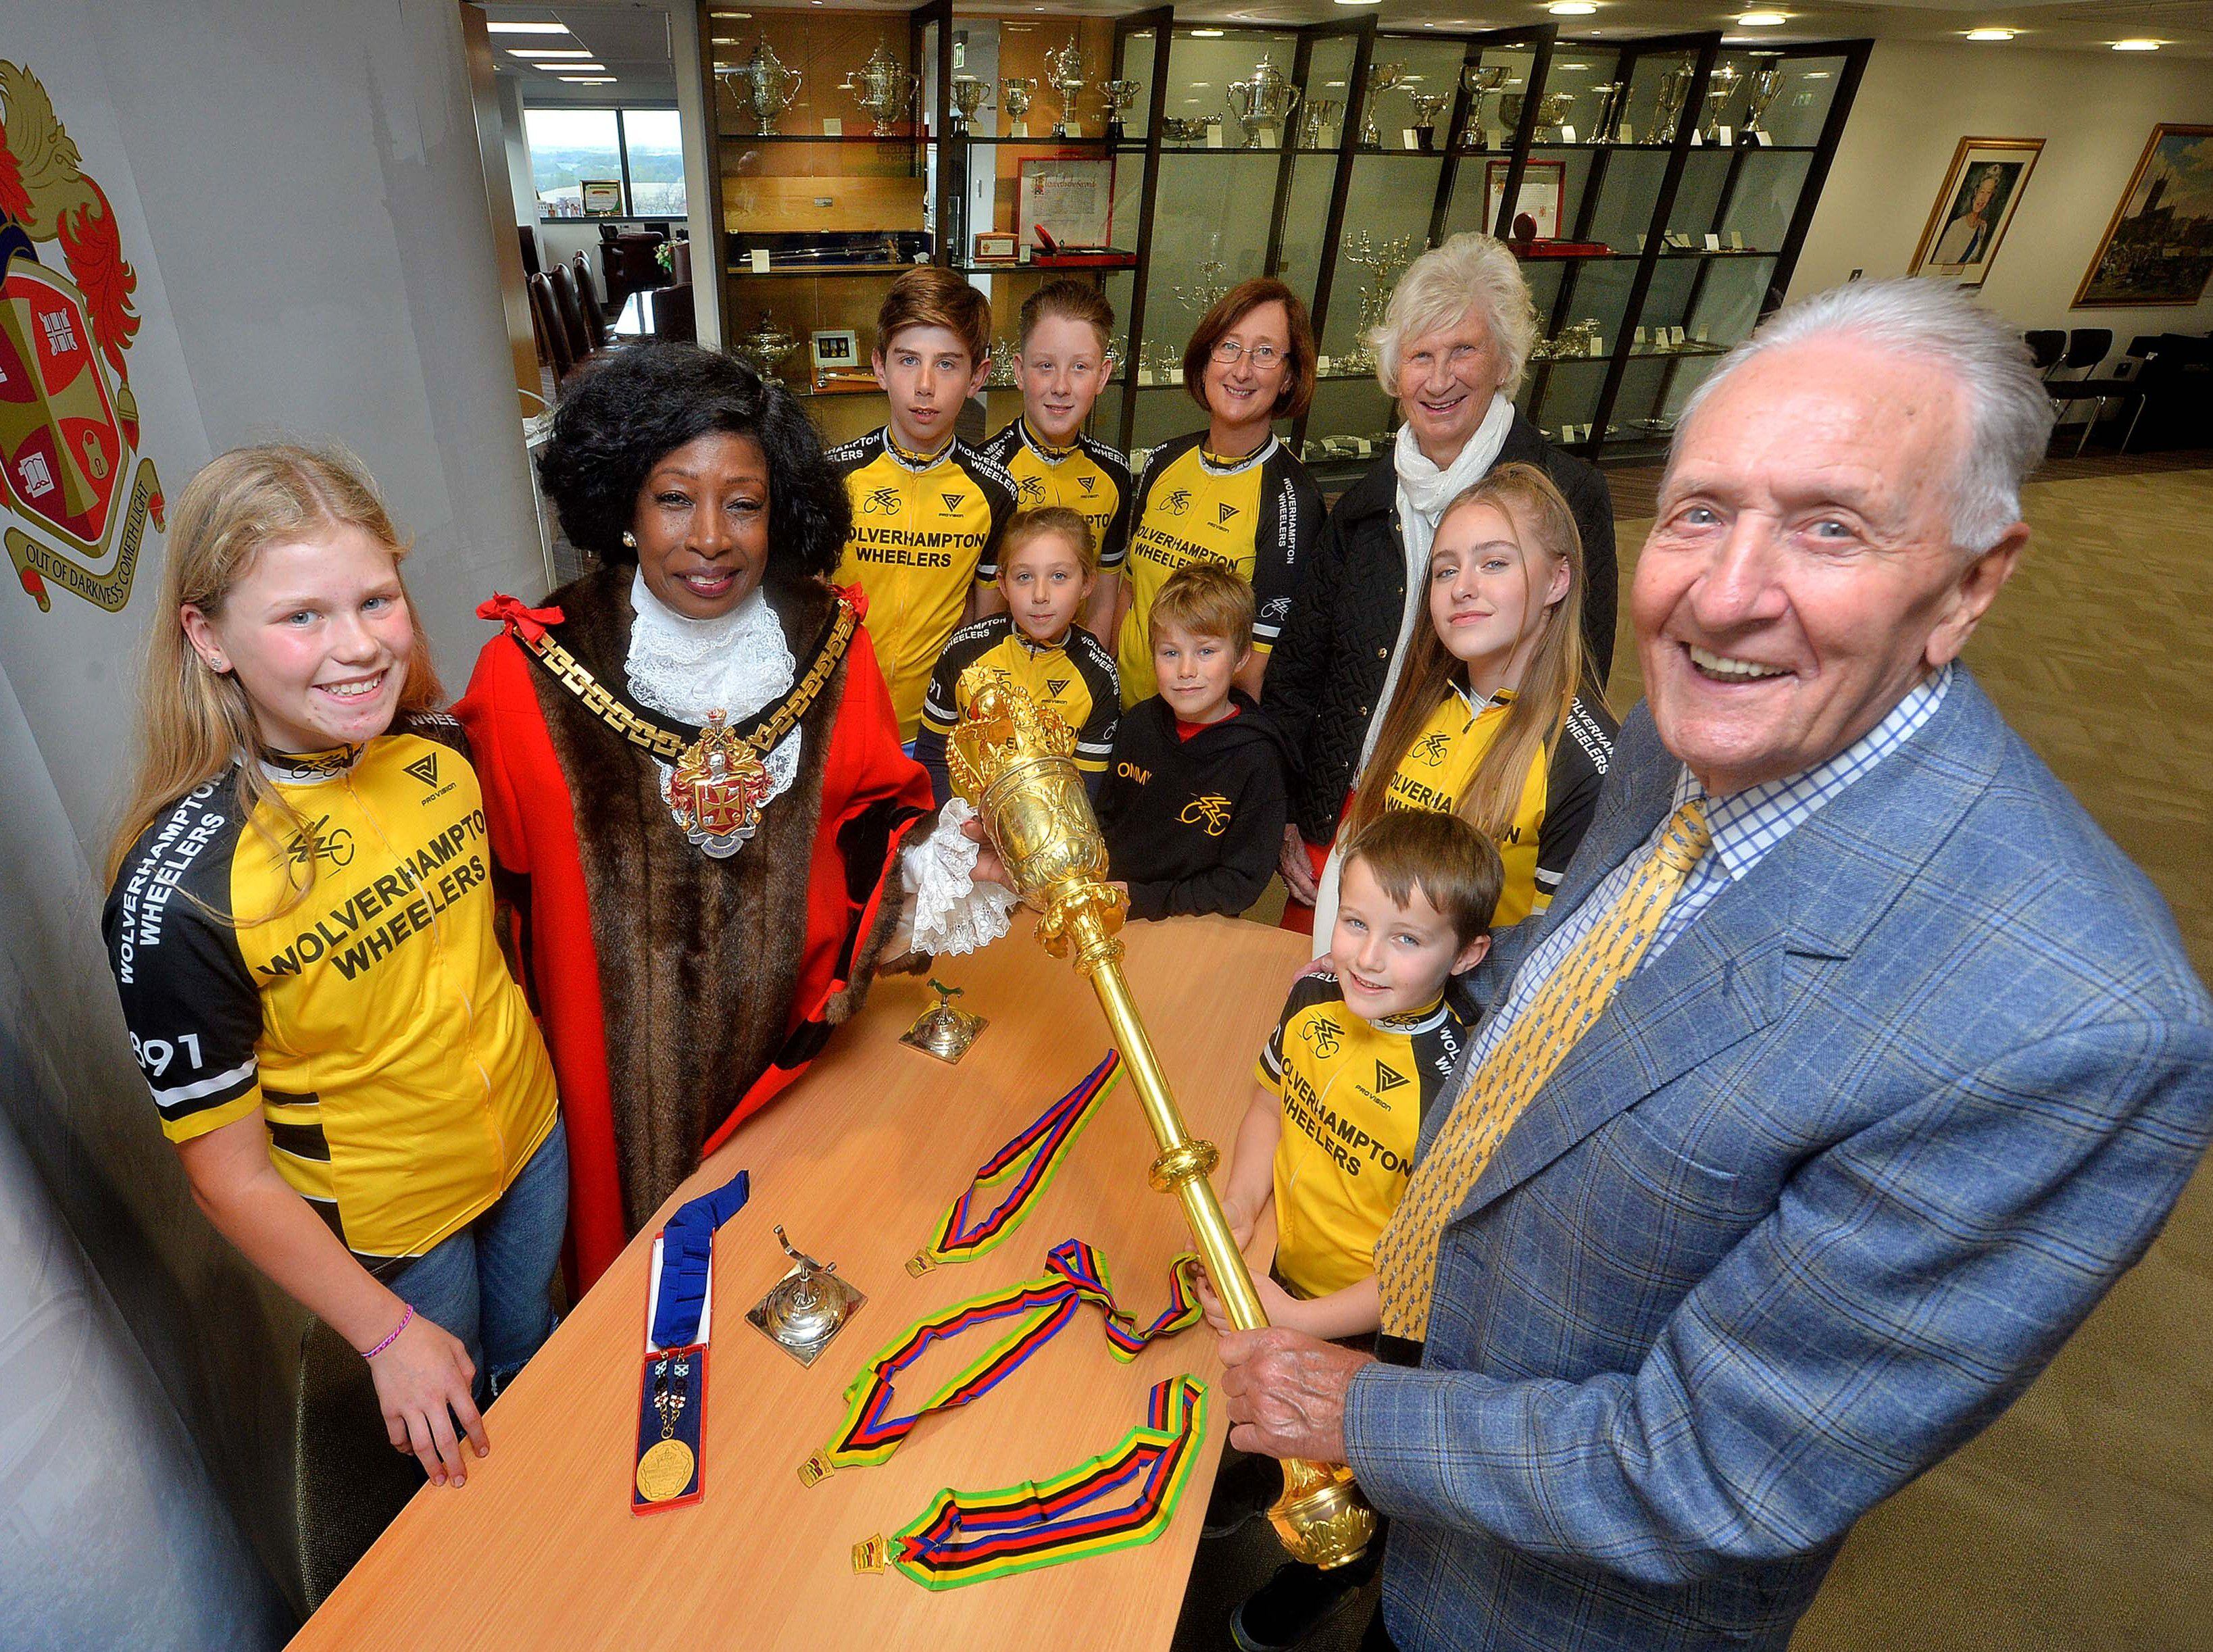 Cycling club meets Wolverhampton Mayor and dress up sporting champion in the robes